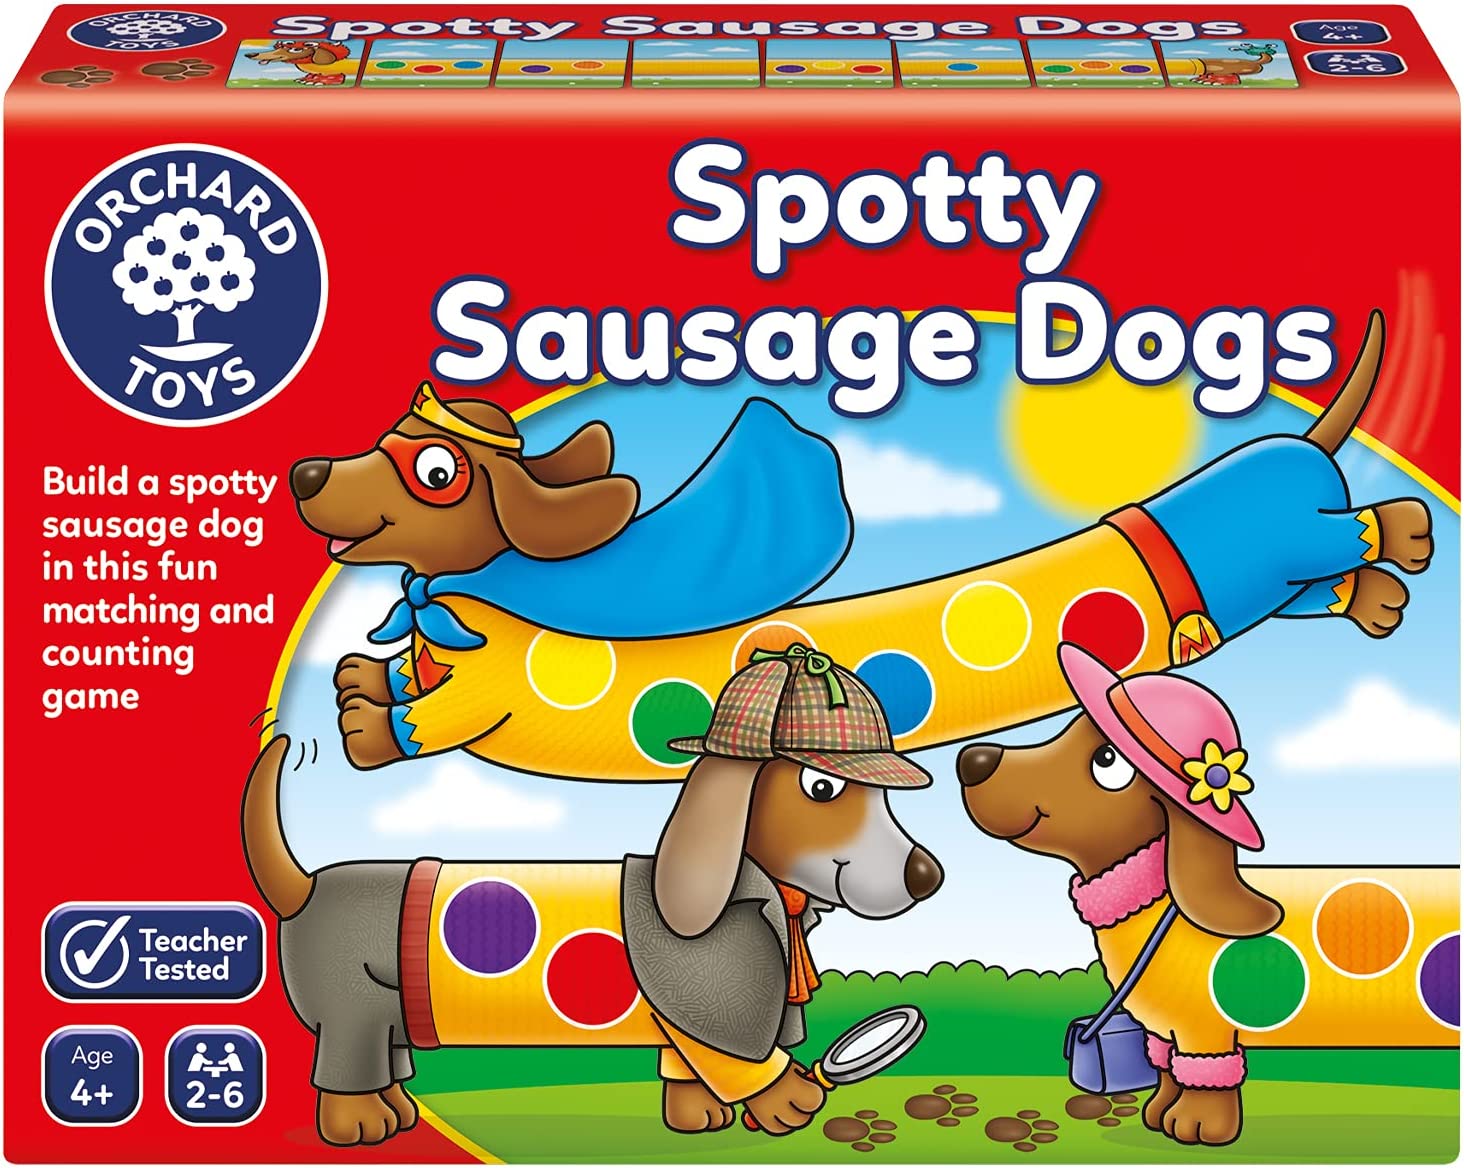 Orchard Spotty Sausage Dogs